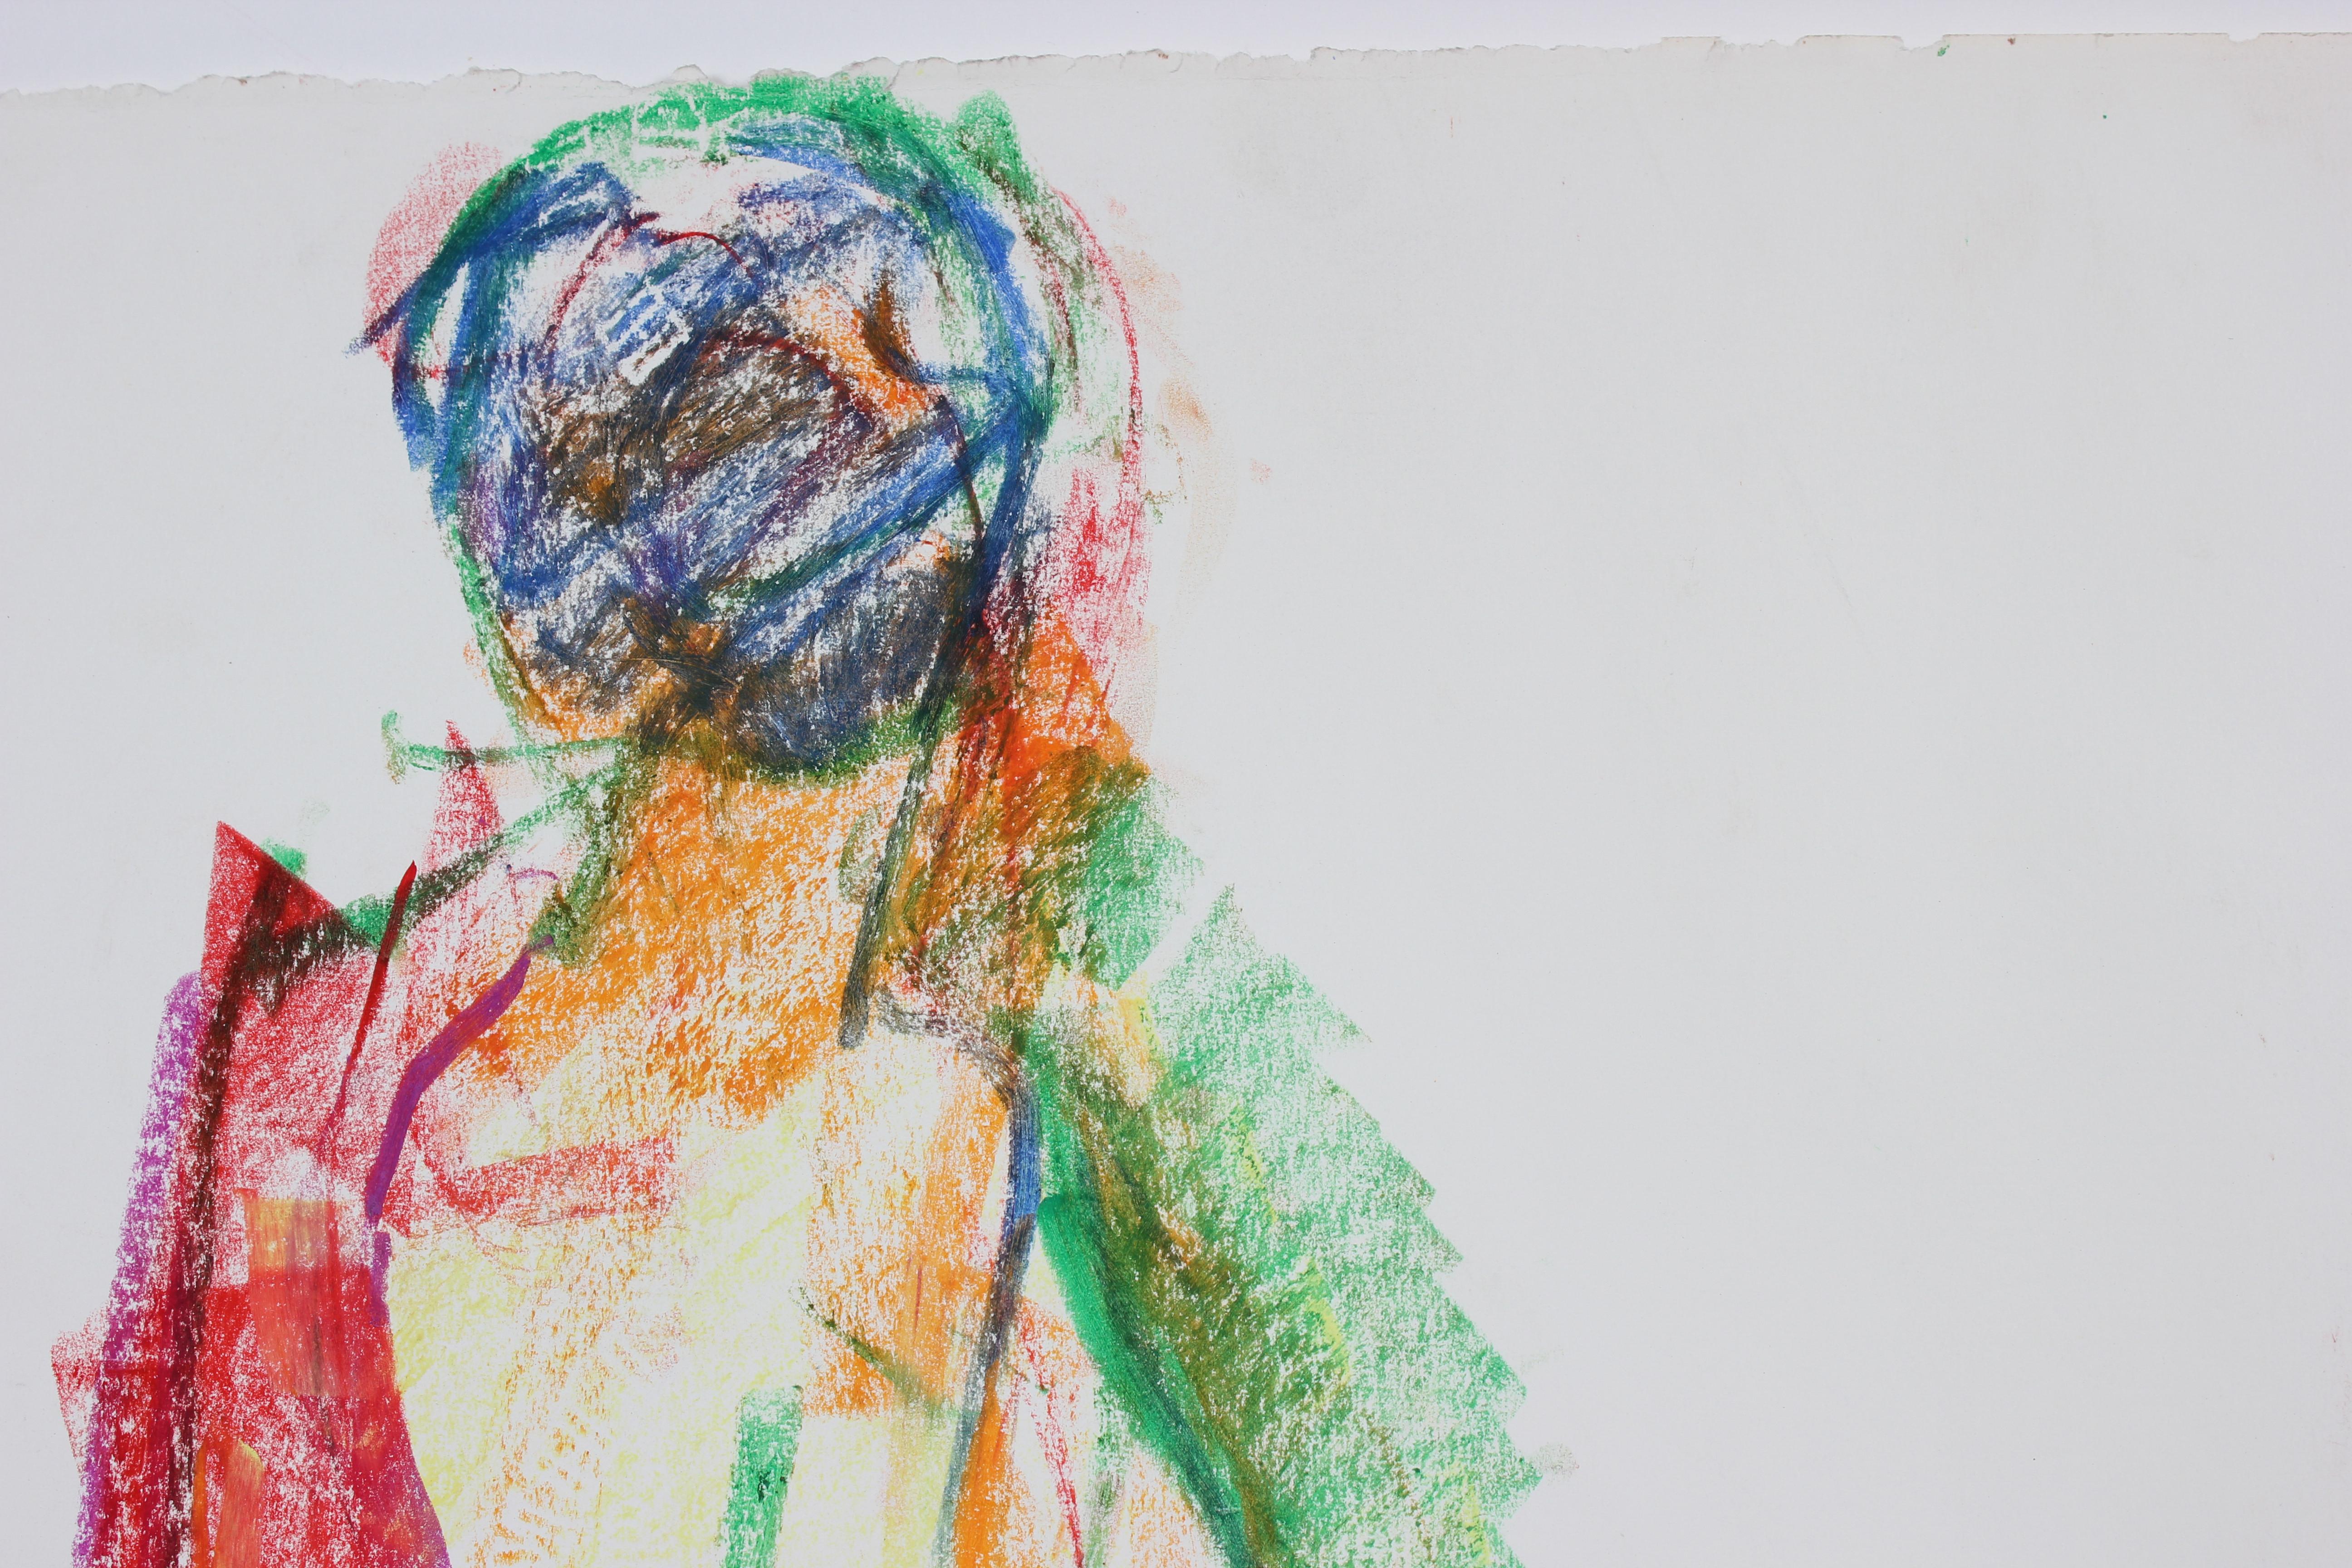 Colorful Expressionist Abstracted Figure in Wax Crayon, 1980 - Art by Jack Freeman